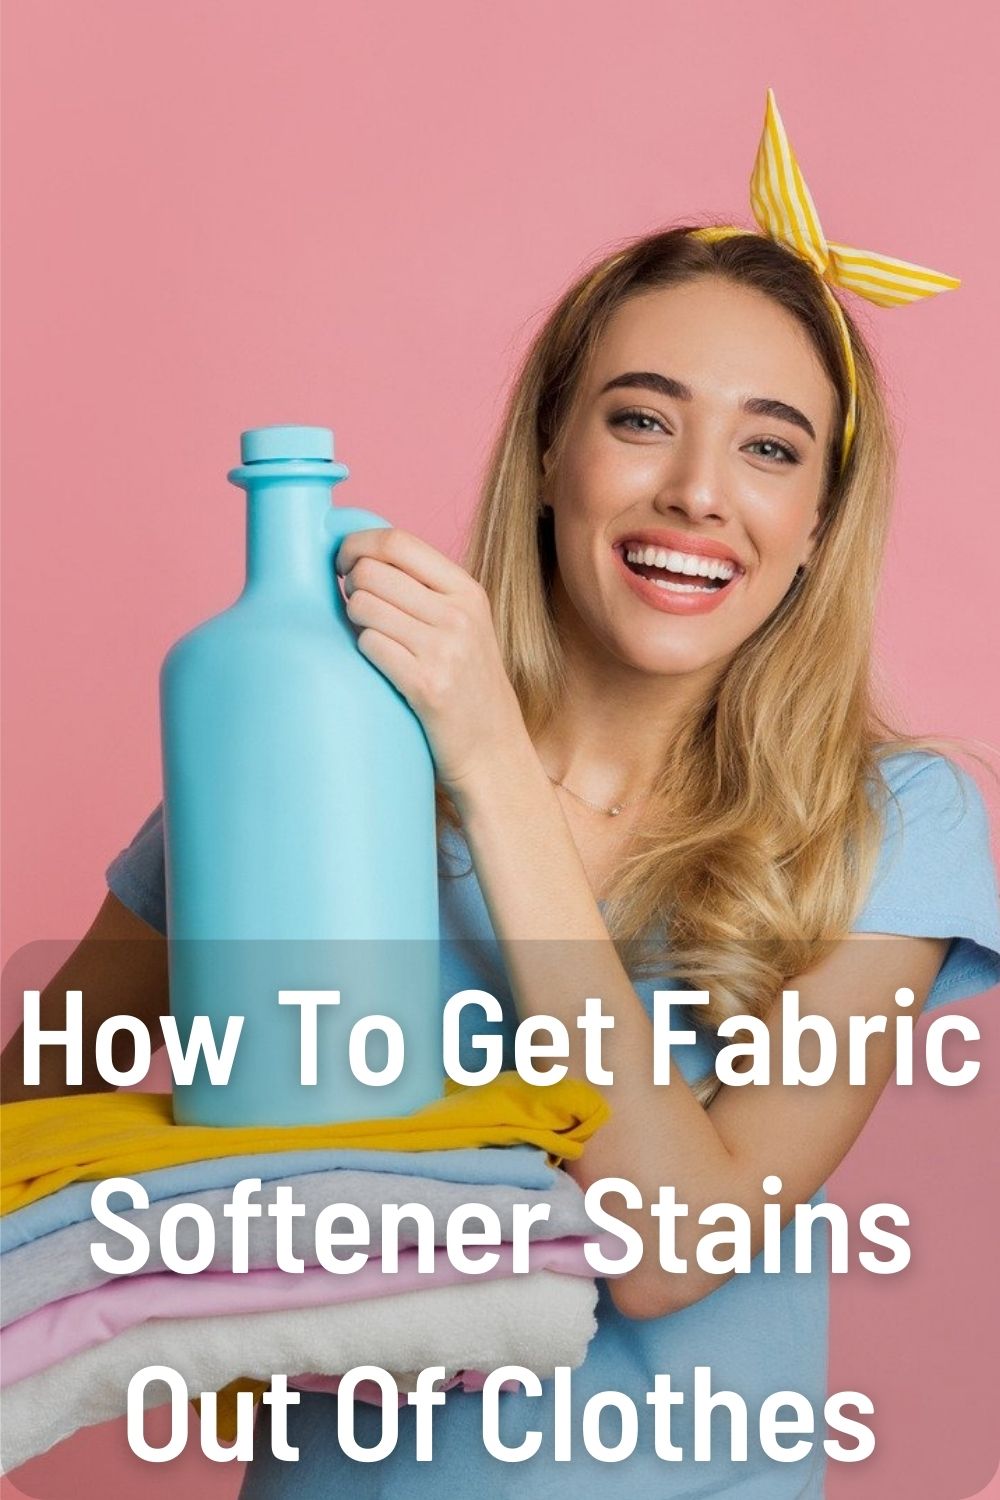 How To Get Fabric Softener Stains Out Of Clothes